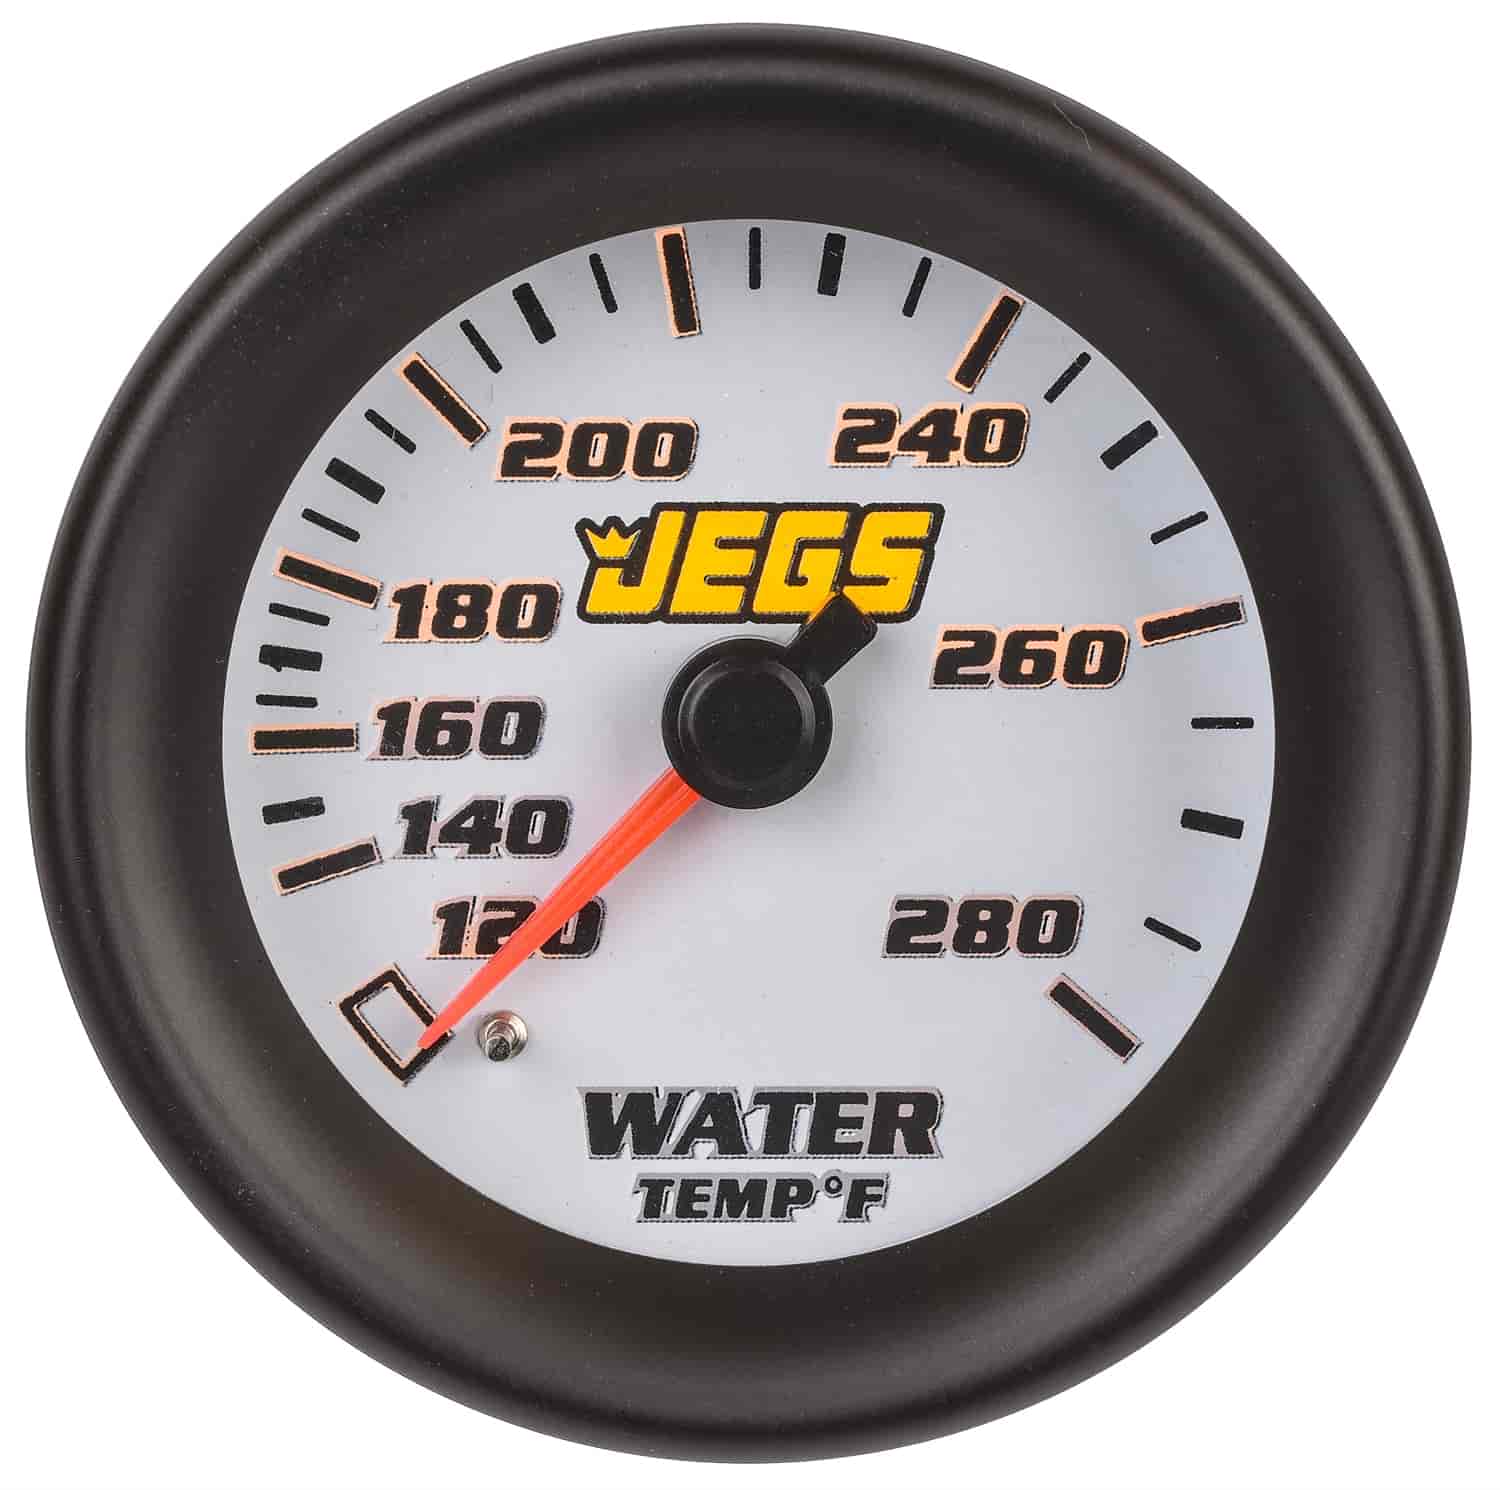 Water Temperature Gauge [2 1/16 in. Mechanical, 120-280 degrees F with White Face]